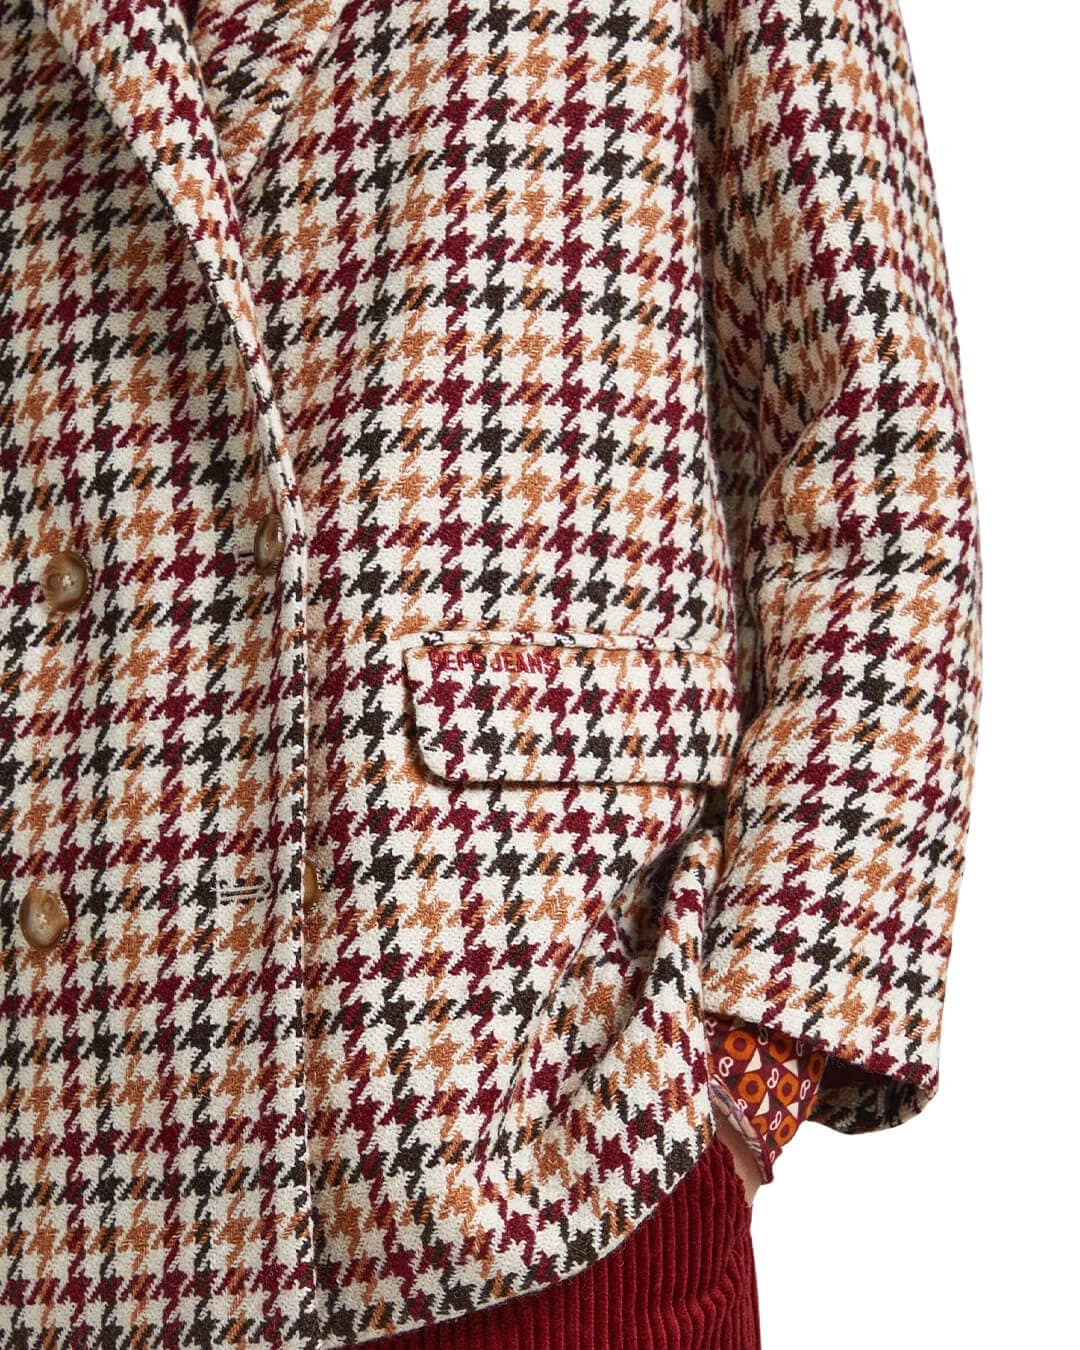 Pepe Jeans Outerwear Pepe Jeans Romina Multicoloured Checked Jacket